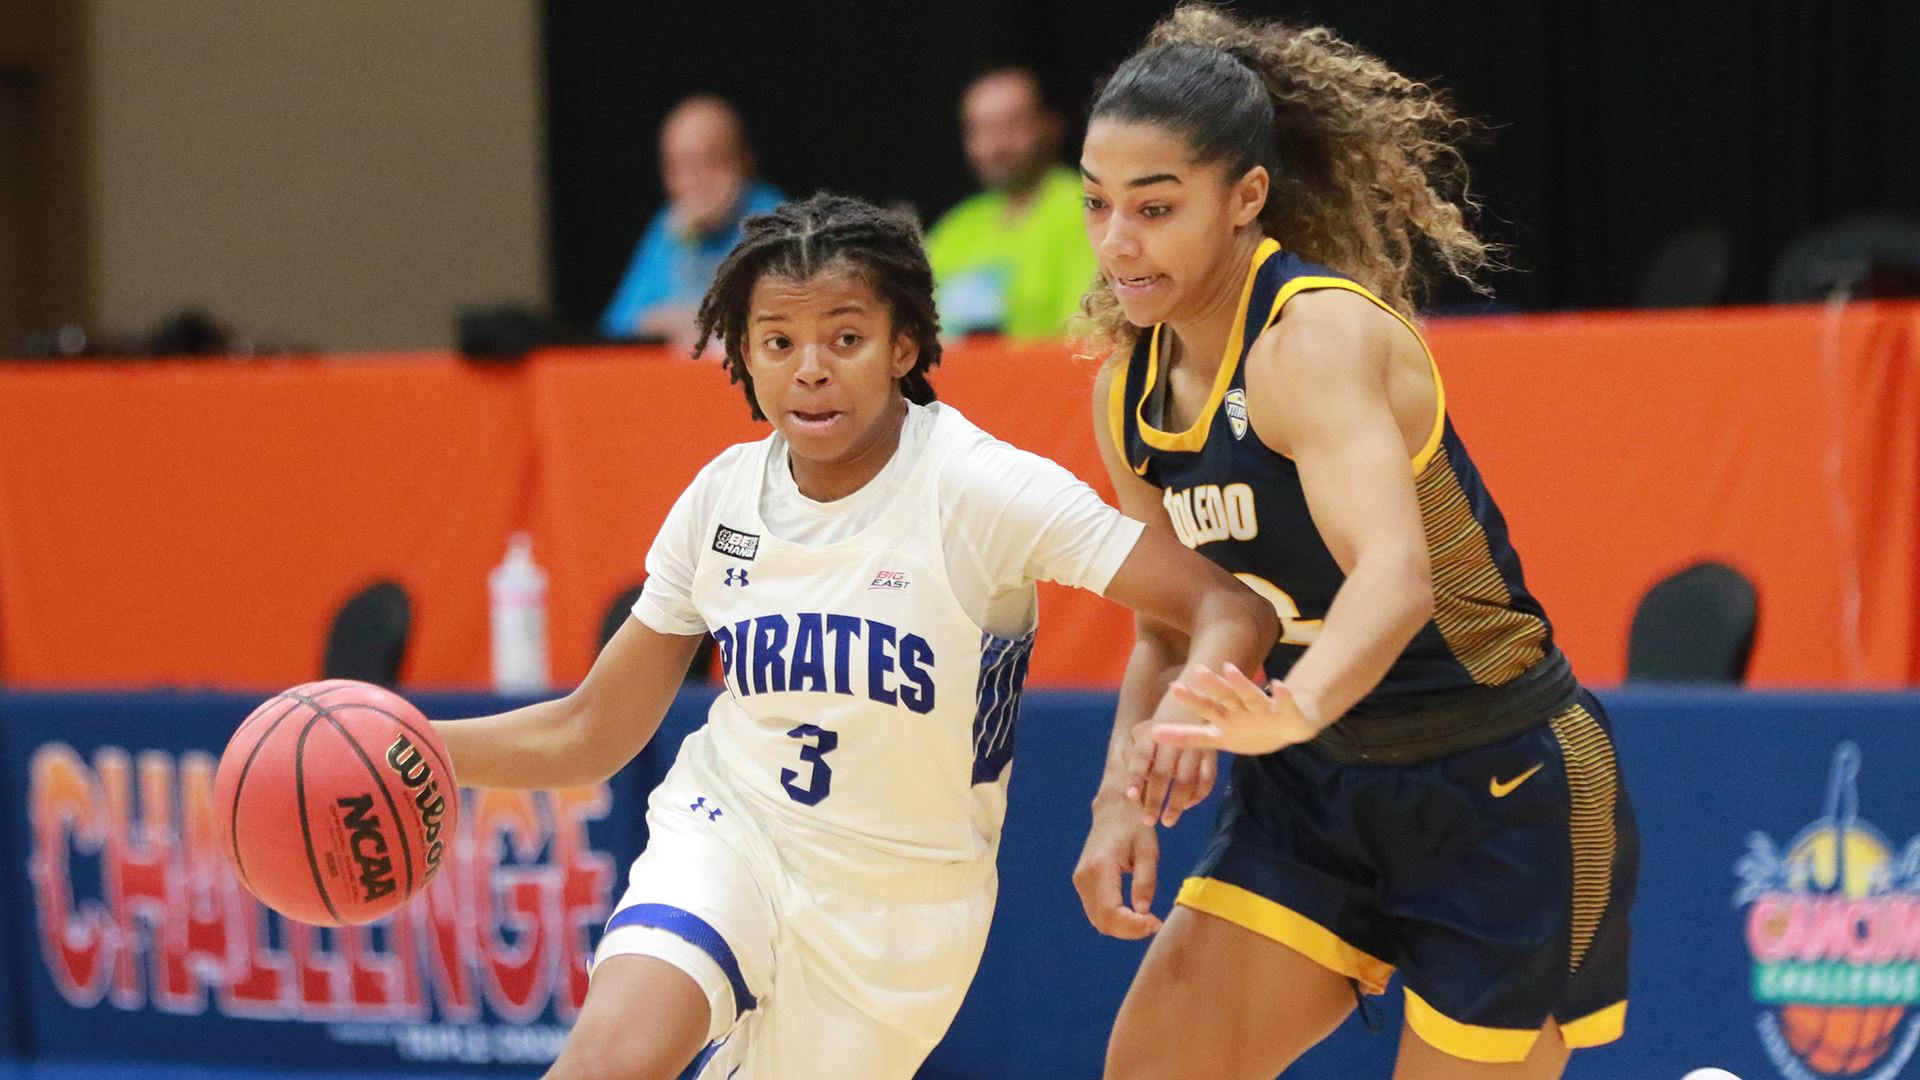 Seton Hall's Lauren Park-Lane drives to the basket during a game against Toledo in the 2021 Cancun Challenge.